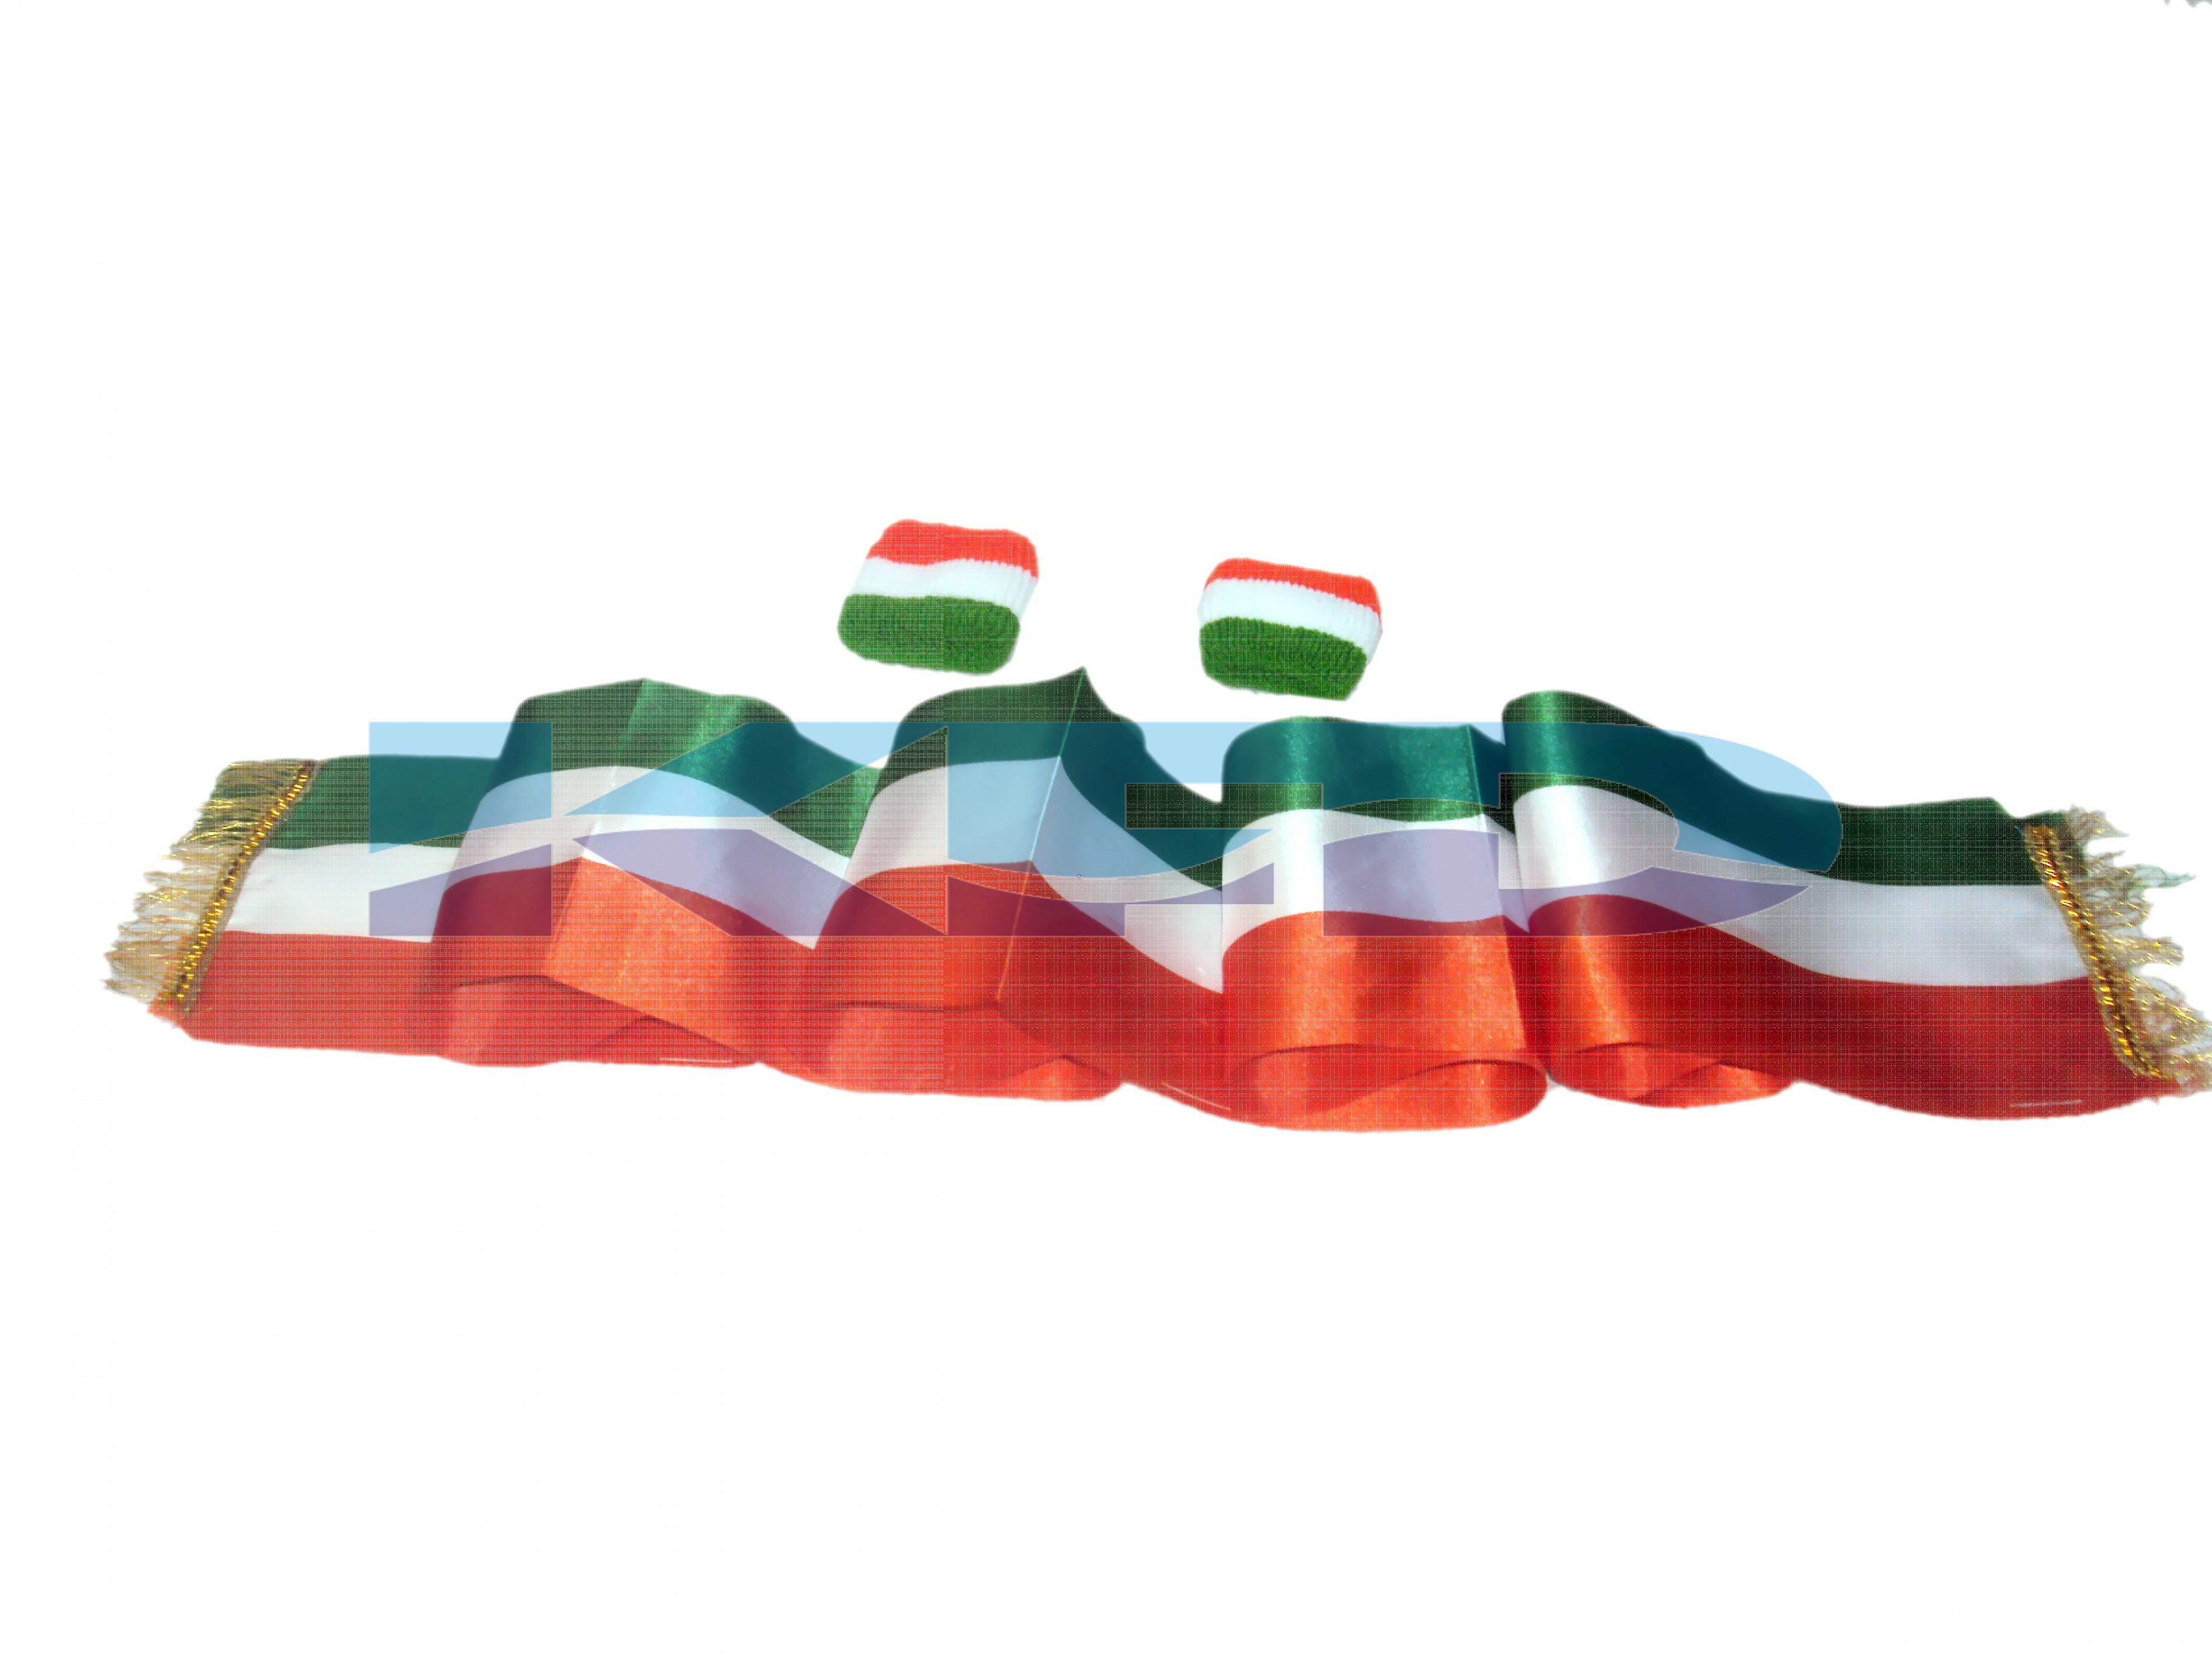 Tri Color Stall/Wrist Band 6 Pieces Set For Independence Day/Republic Day/School Annual function/Theme Party/Competition/Stage Shows/Birthday Party Dress(6 pcs set)